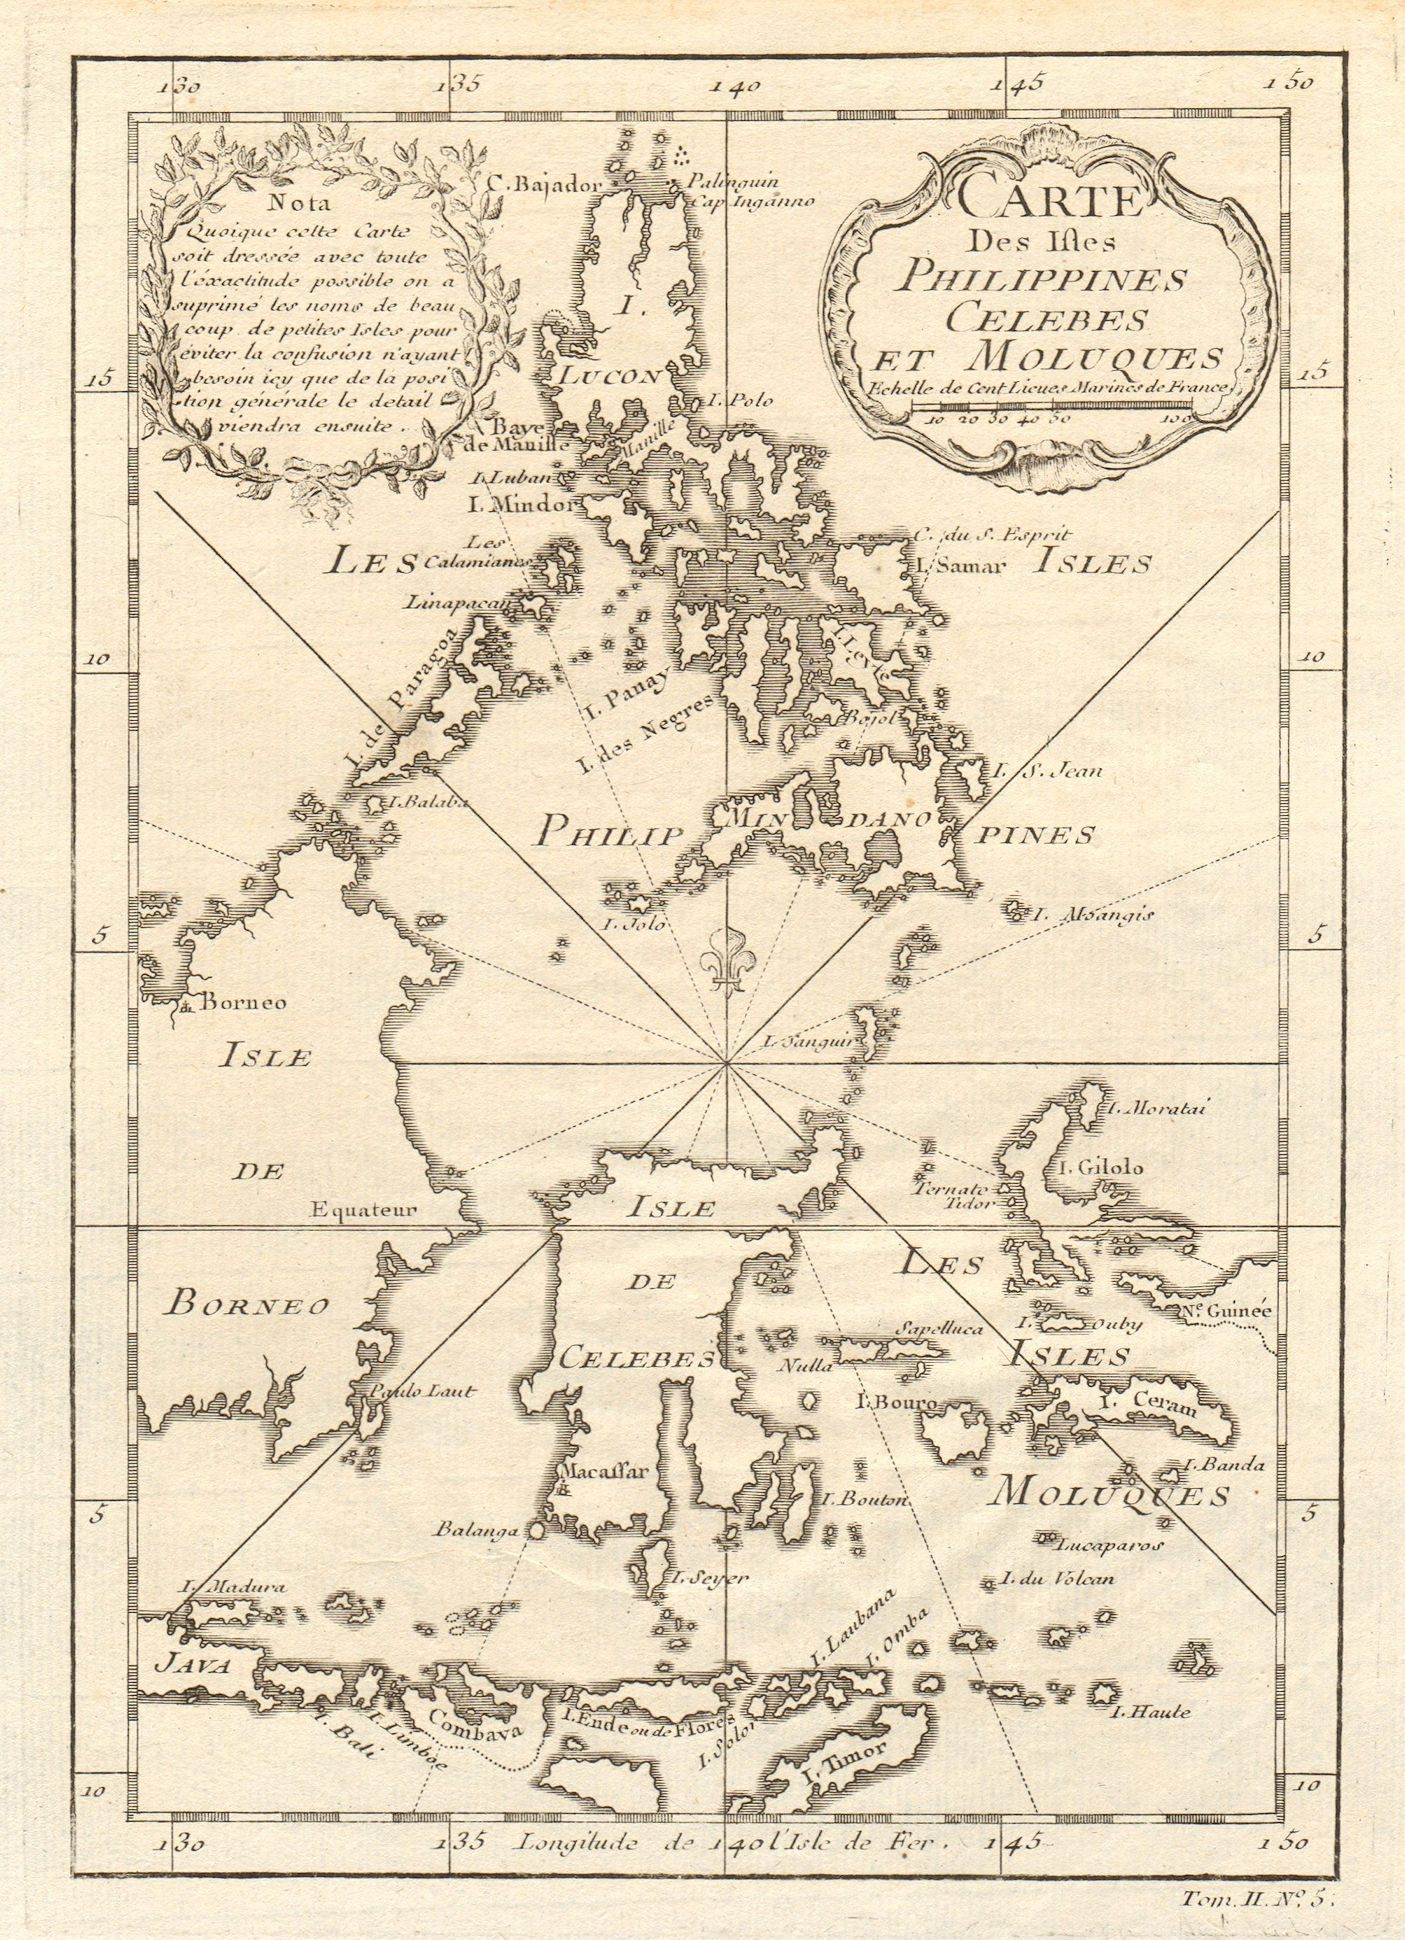 Associate Product 'Carte des Isles Philippines, Celebes & Moluques'. East Indies. BELLIN 1746 map